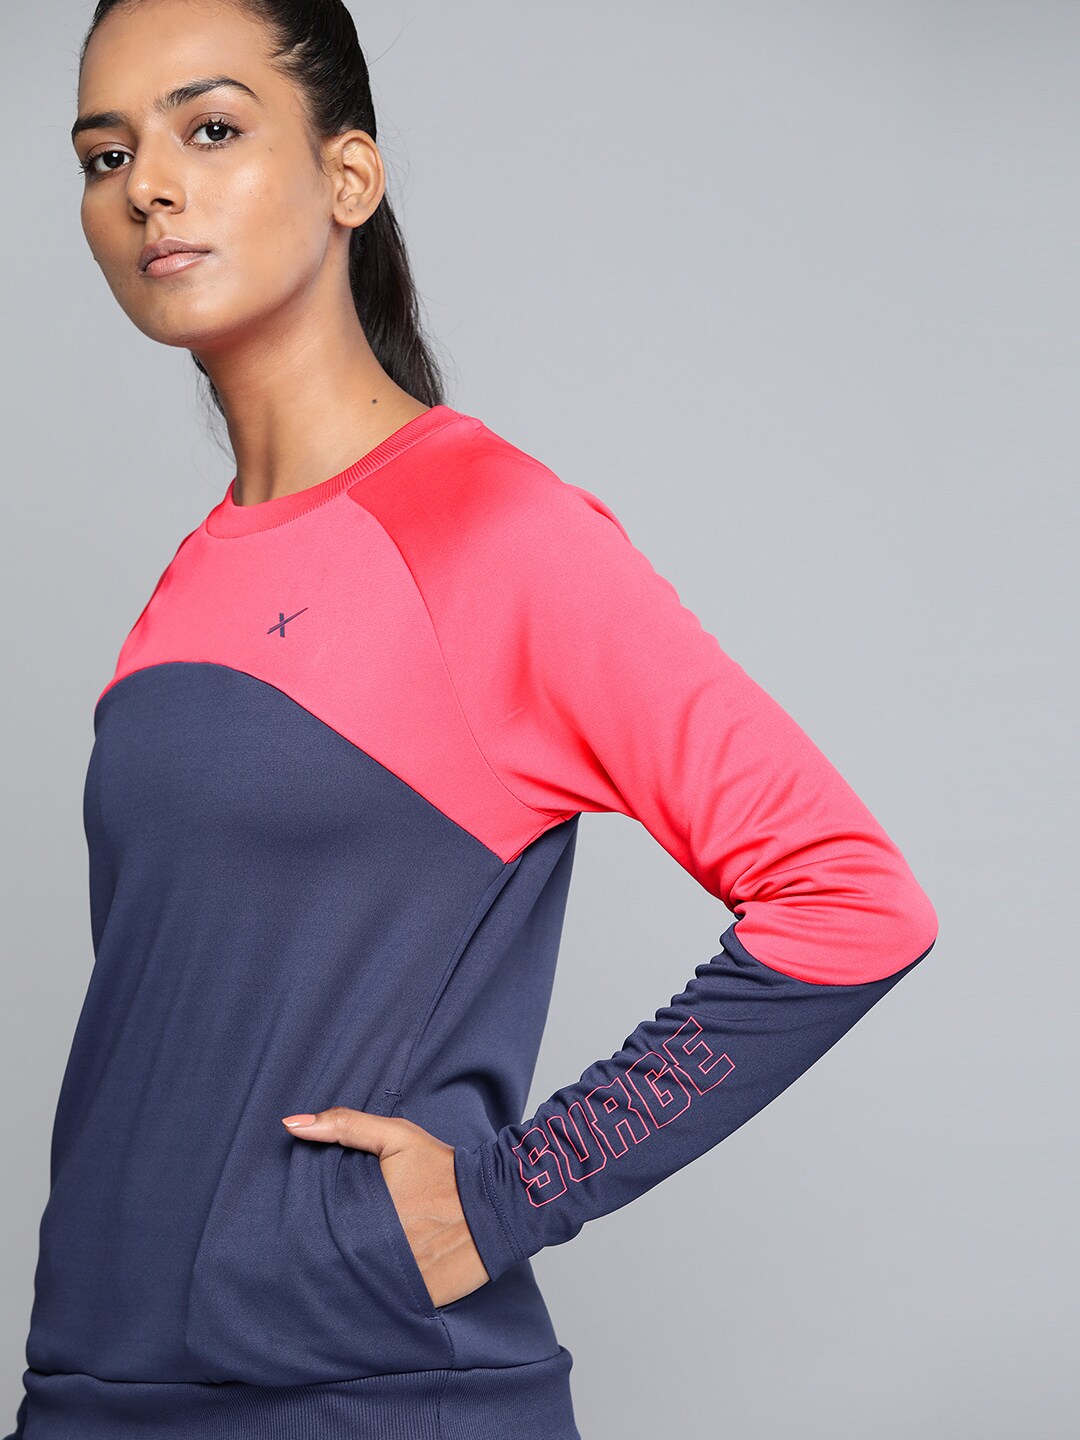 HRX By Hrithik Roshan Lifestyle Women Hothouse Pink Rapid-Dry Colourblock Sweatshirts Price in India